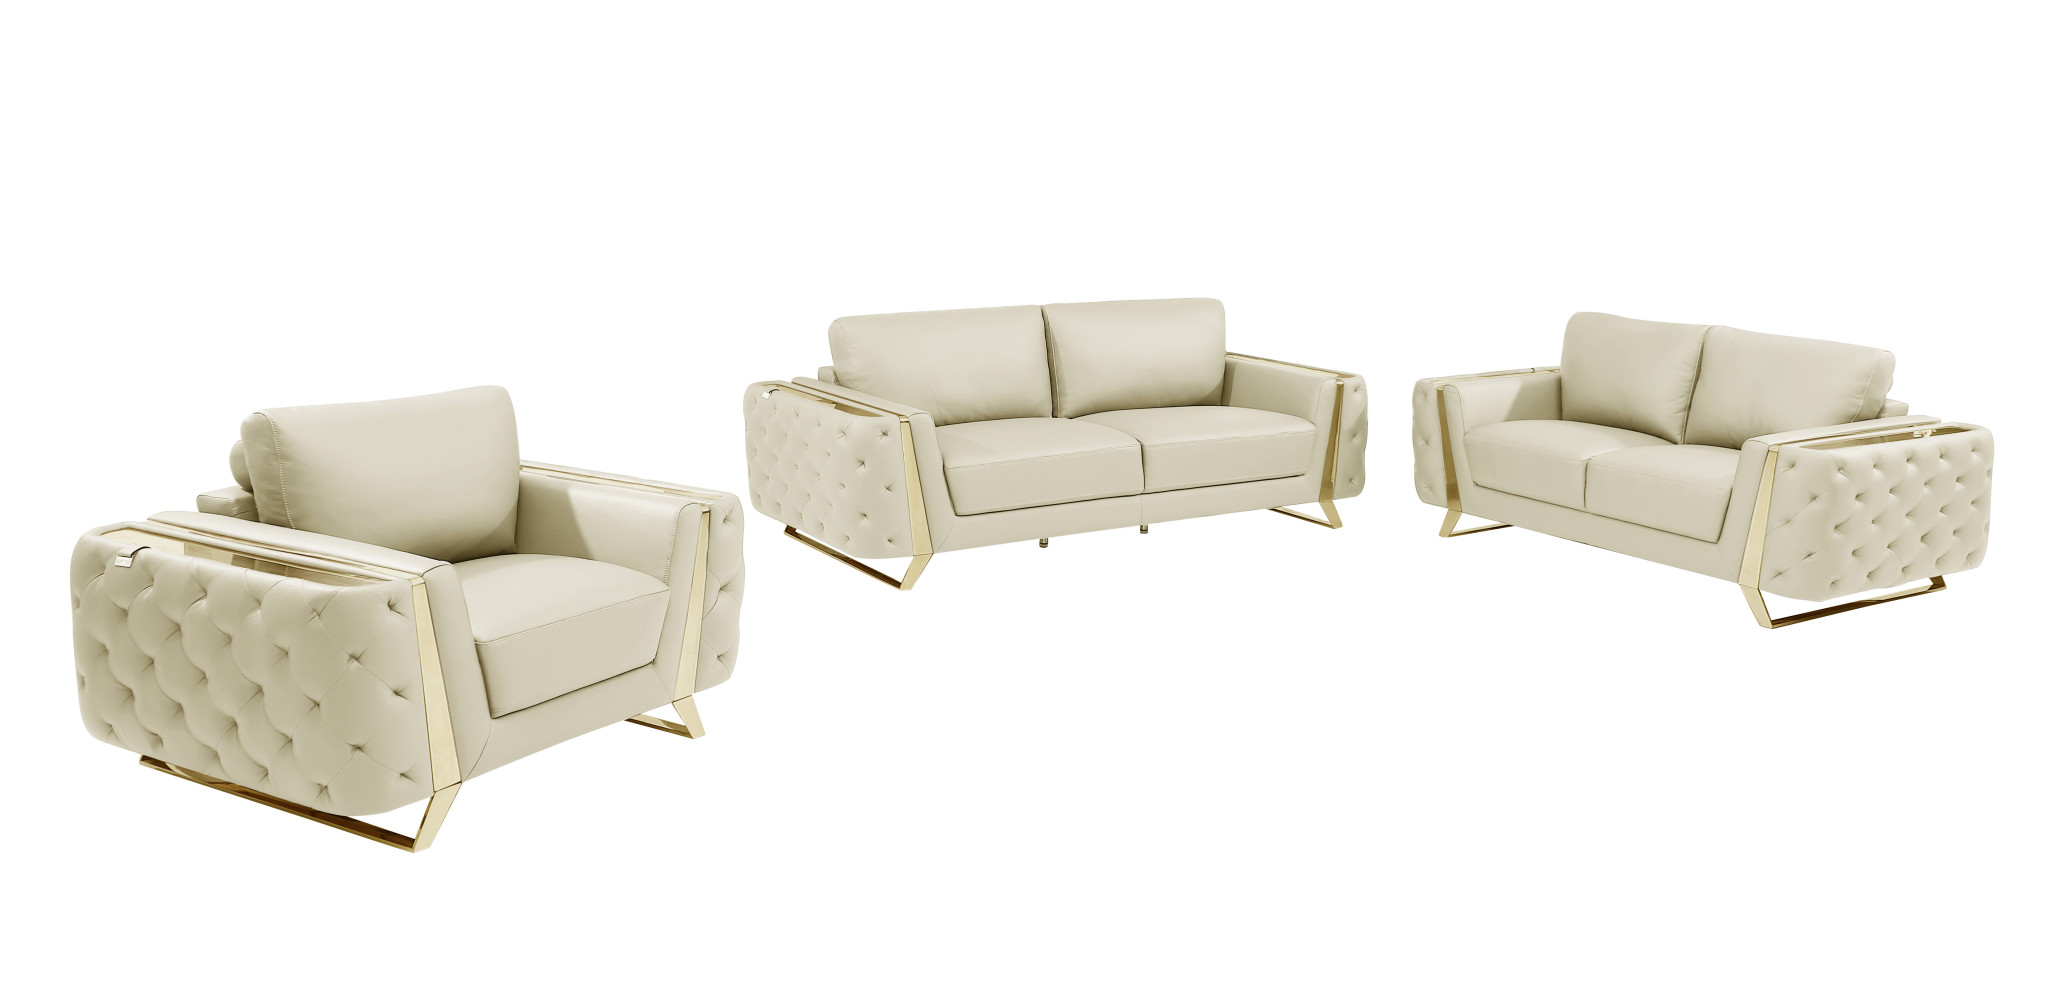 Three Piece Indoor Beige Italian Leather Six Person Seating Set-518556-1